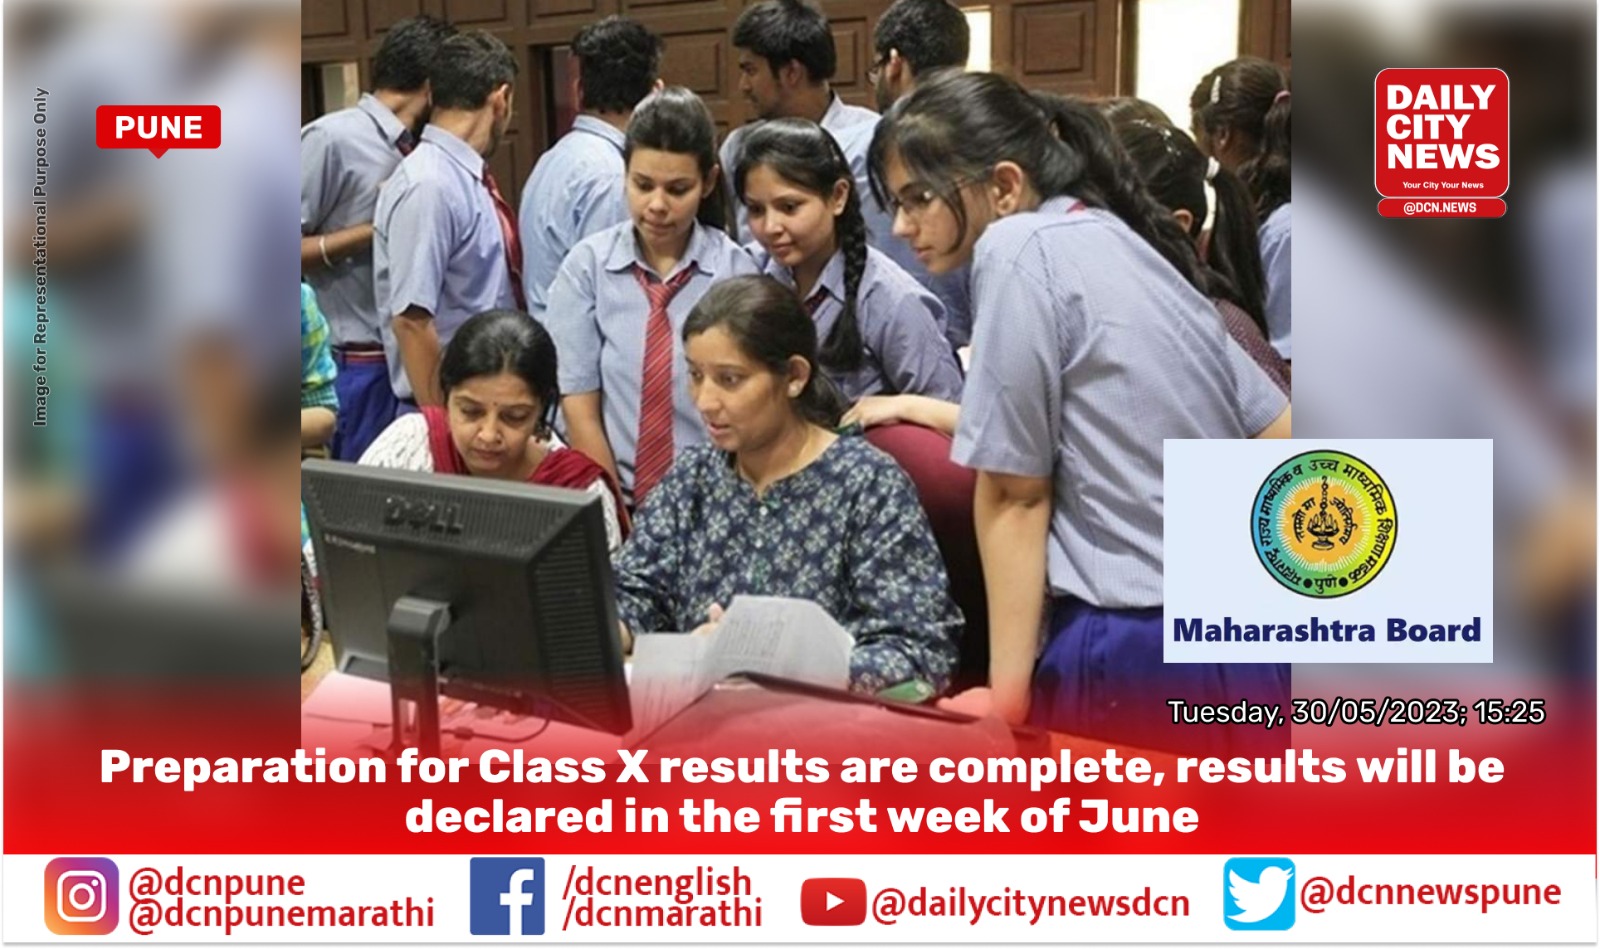 Preparation for Class X results are complete, results will be declared in the first week of June